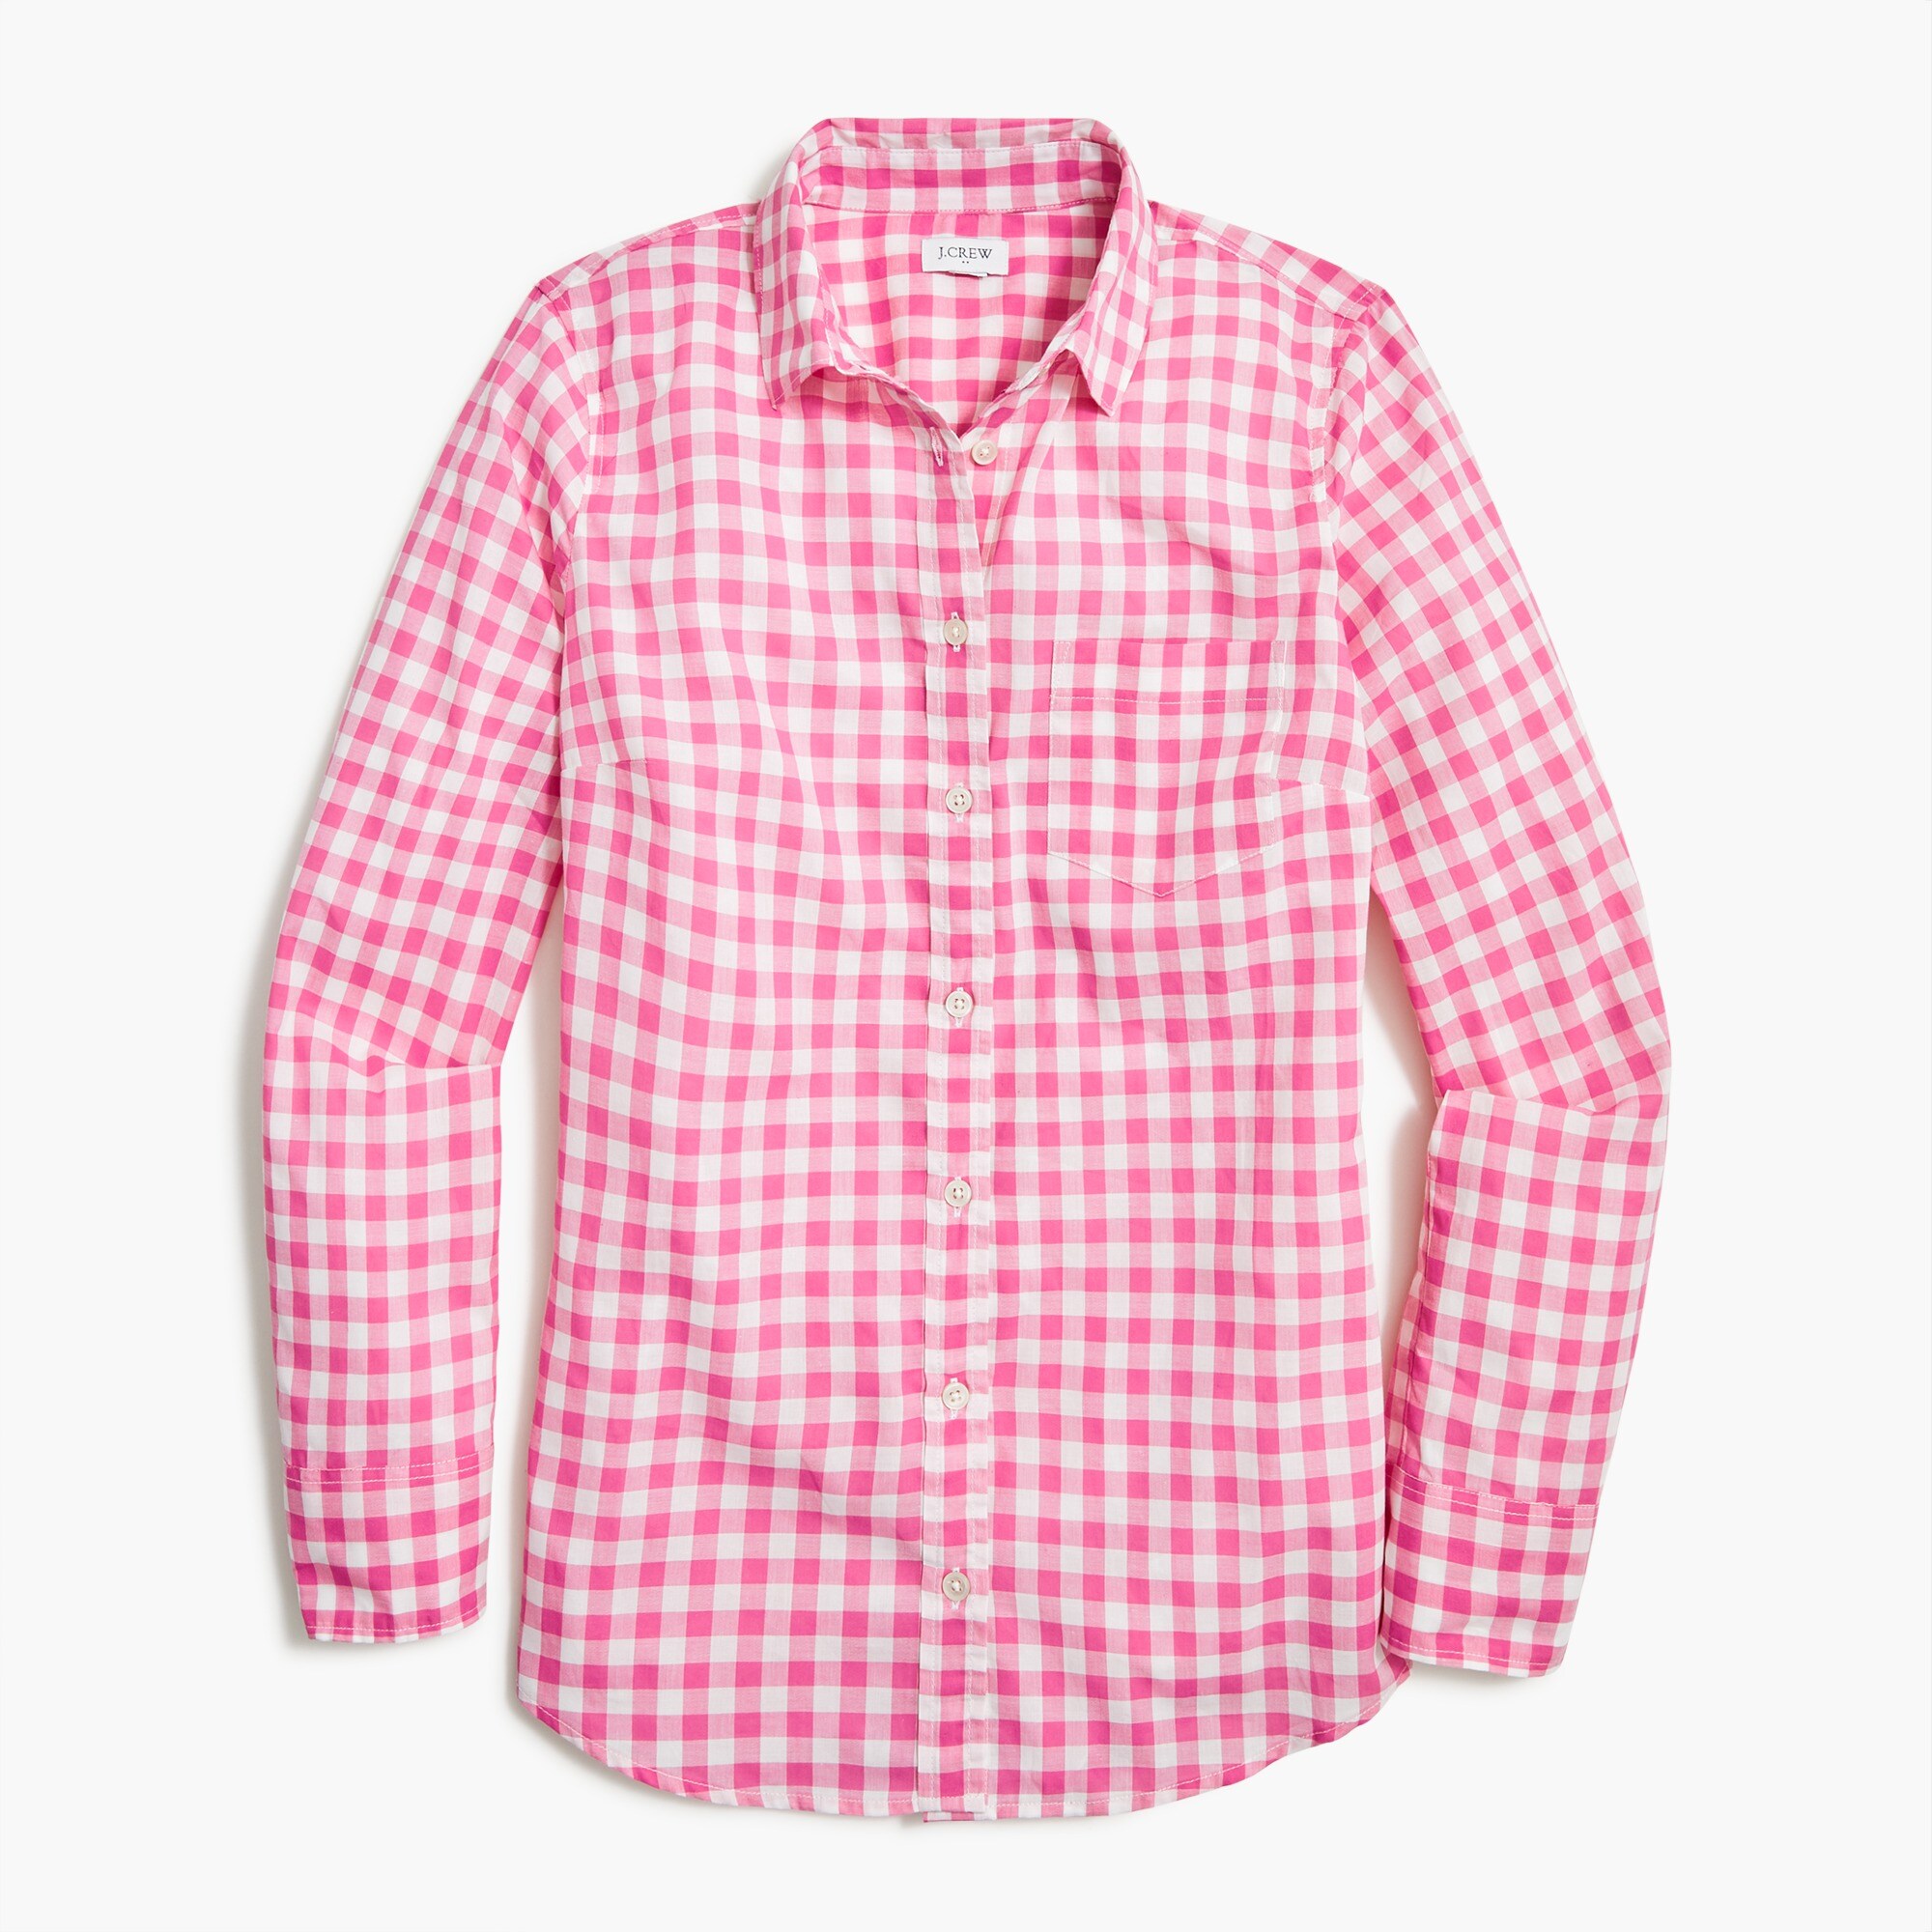  Petite gingham button-up shirt in signature fit